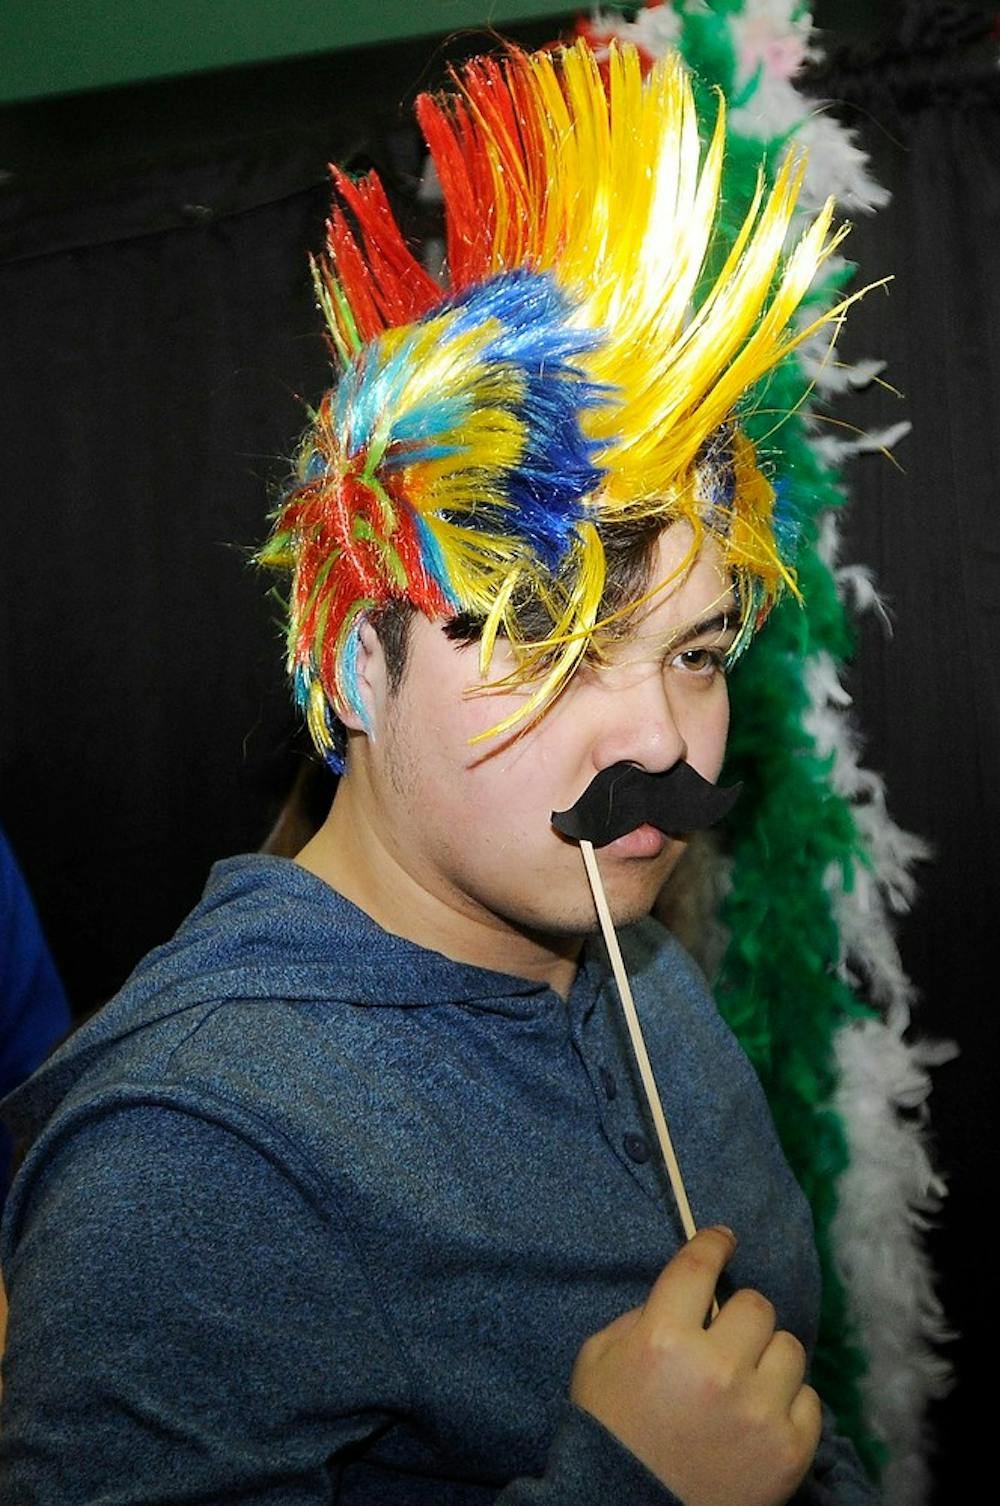 <p>Hospitality Business freshman Michael Hugh puts on a costume to enter the photo booth at the Relay For Life fundraiser March 28, 2014, at Breslin Center. All proceeds from the event will go towards the American Cancer Society. Allison Brooks/The State News</p>